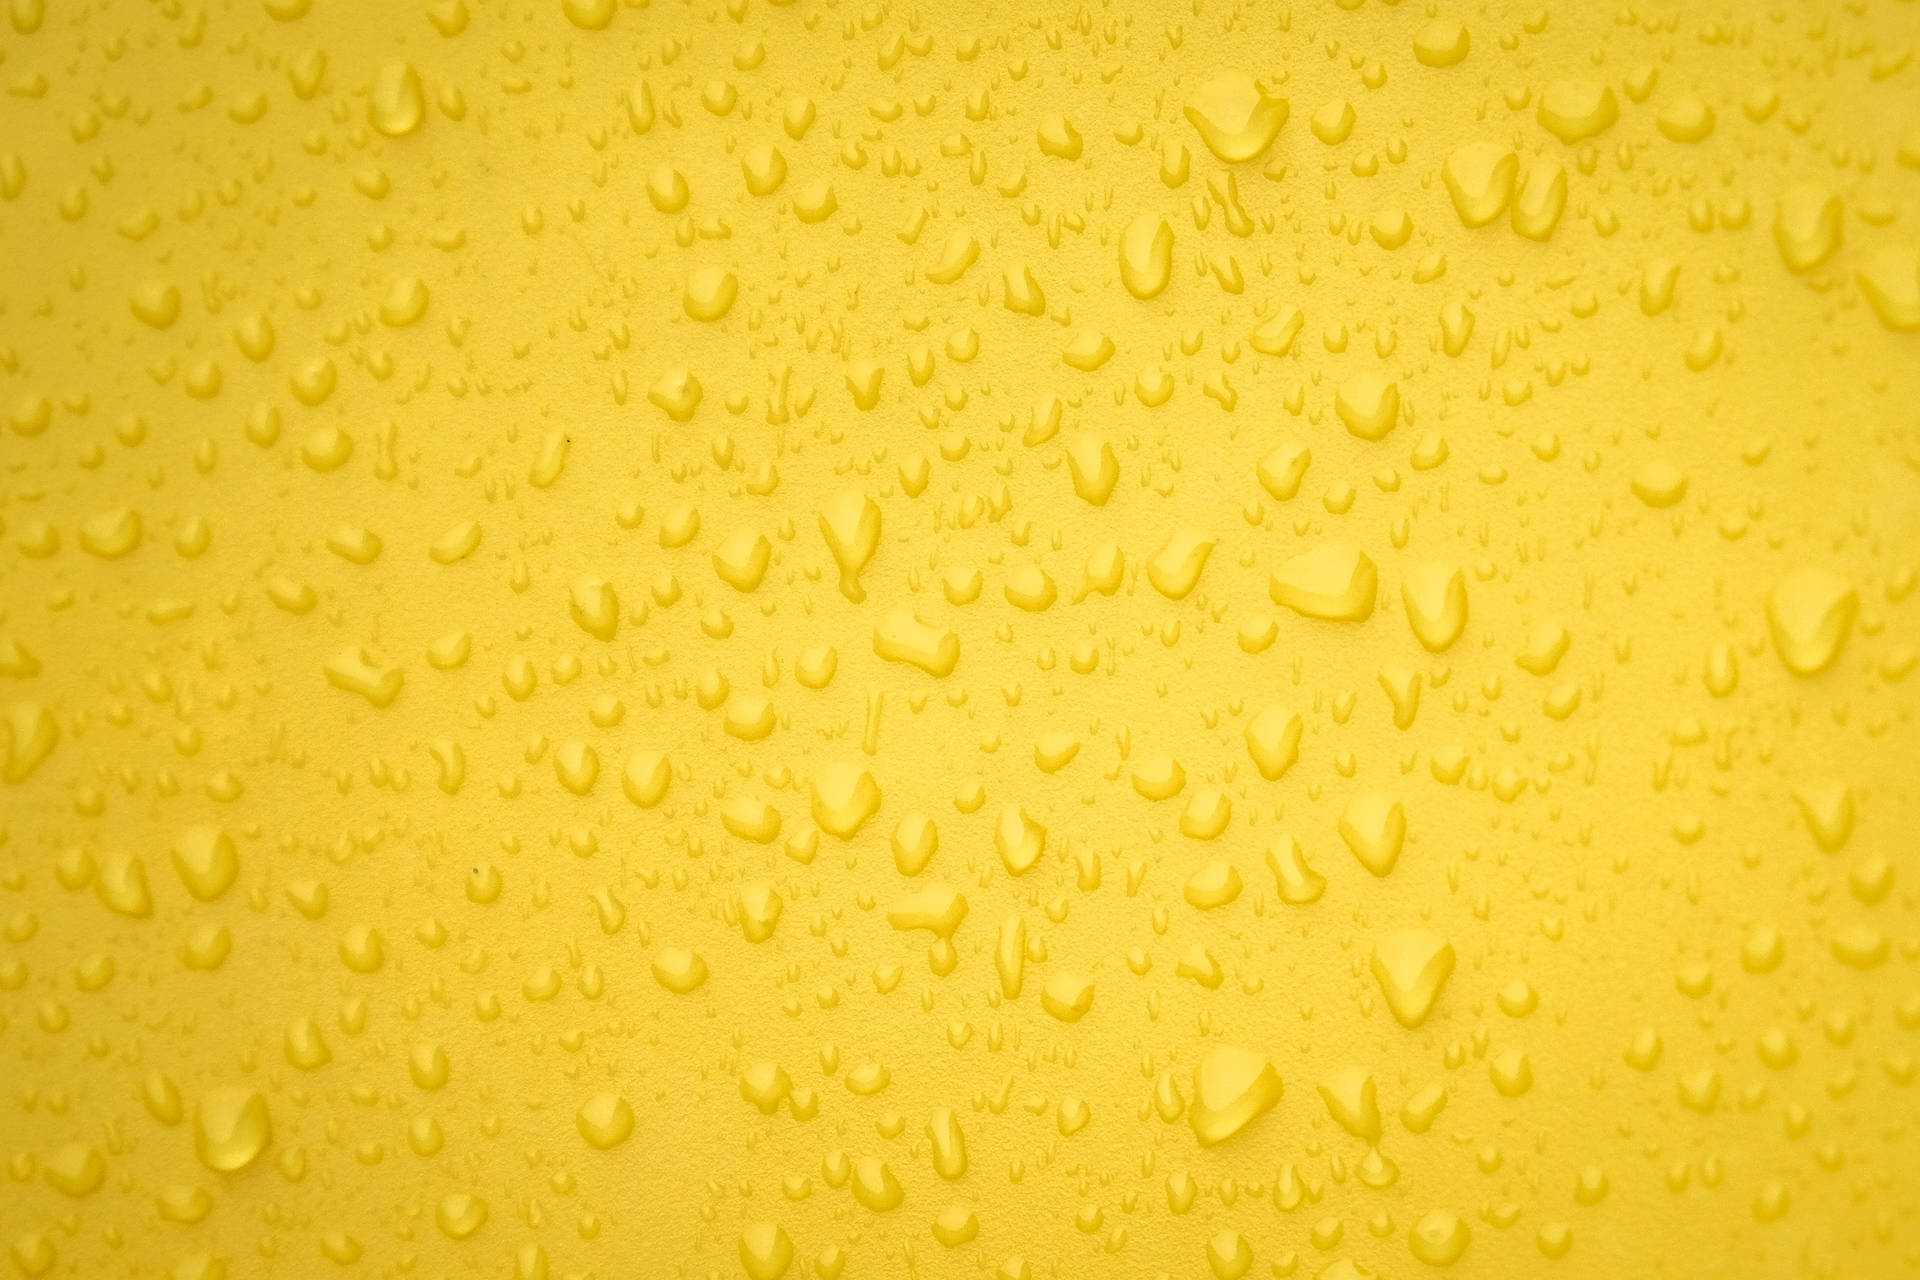 3934X2623 Yellow Wallpaper and Background